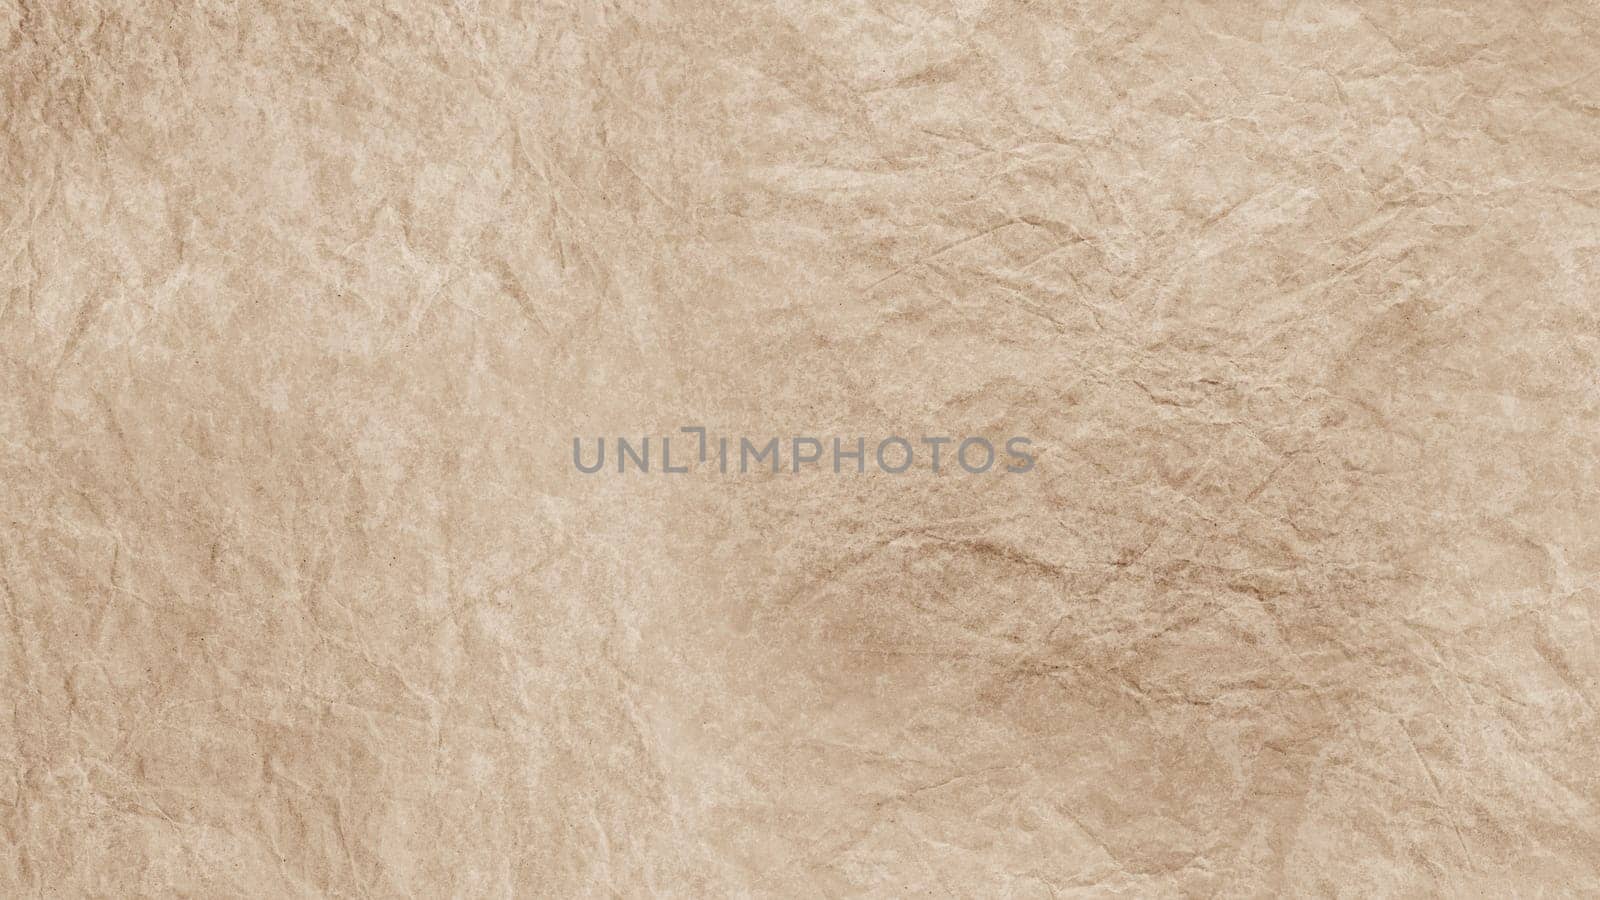 Crumpled paper texture. Abstract background. Light cream color. High quality photo